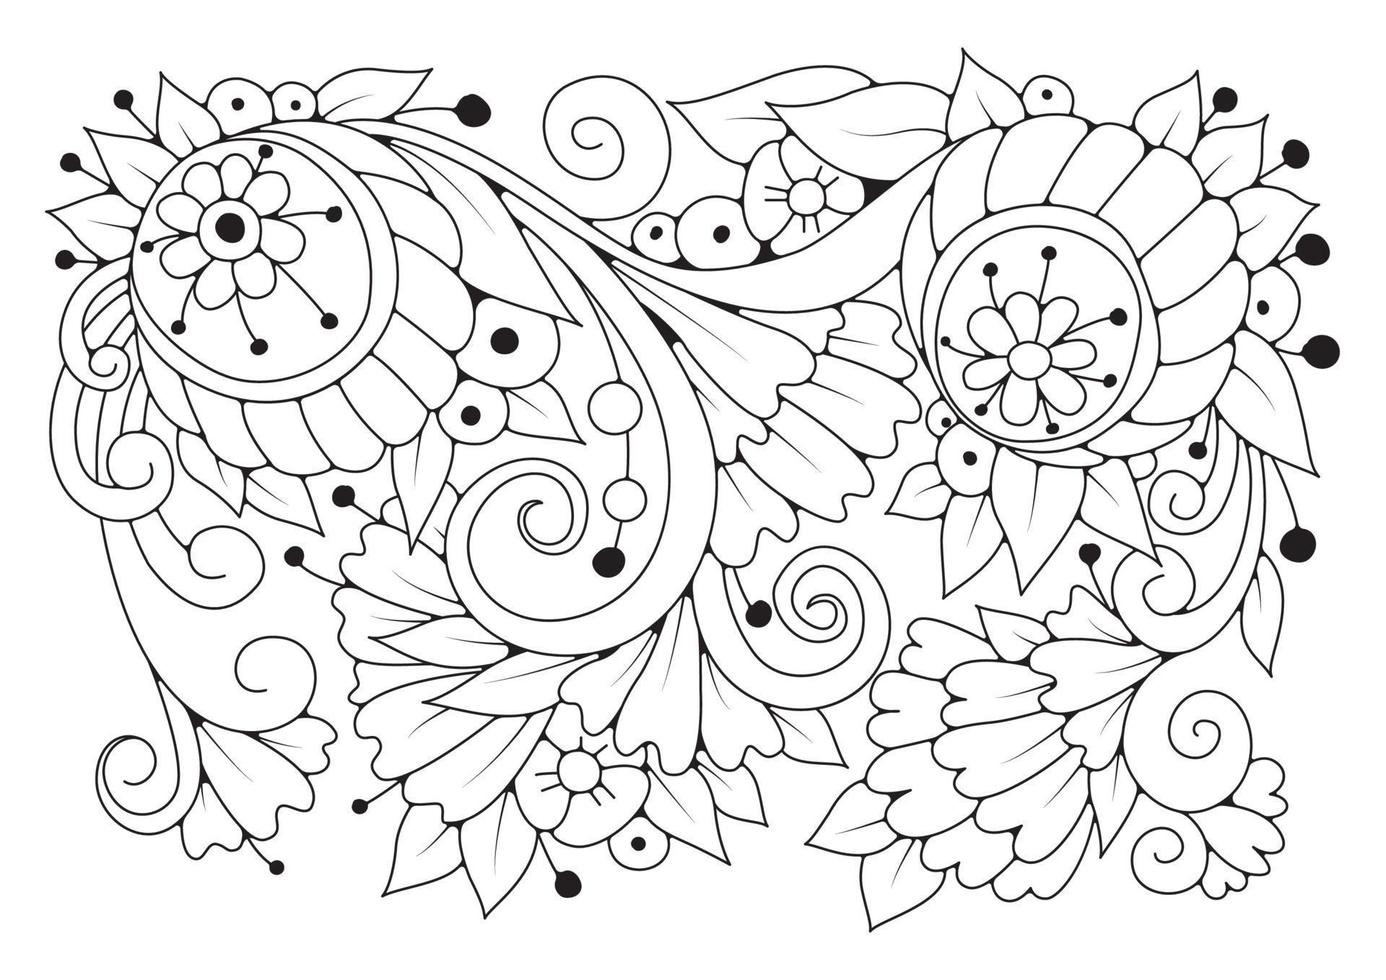 Vector illustration for coloring book. Black and white floral bouquet with leaves.